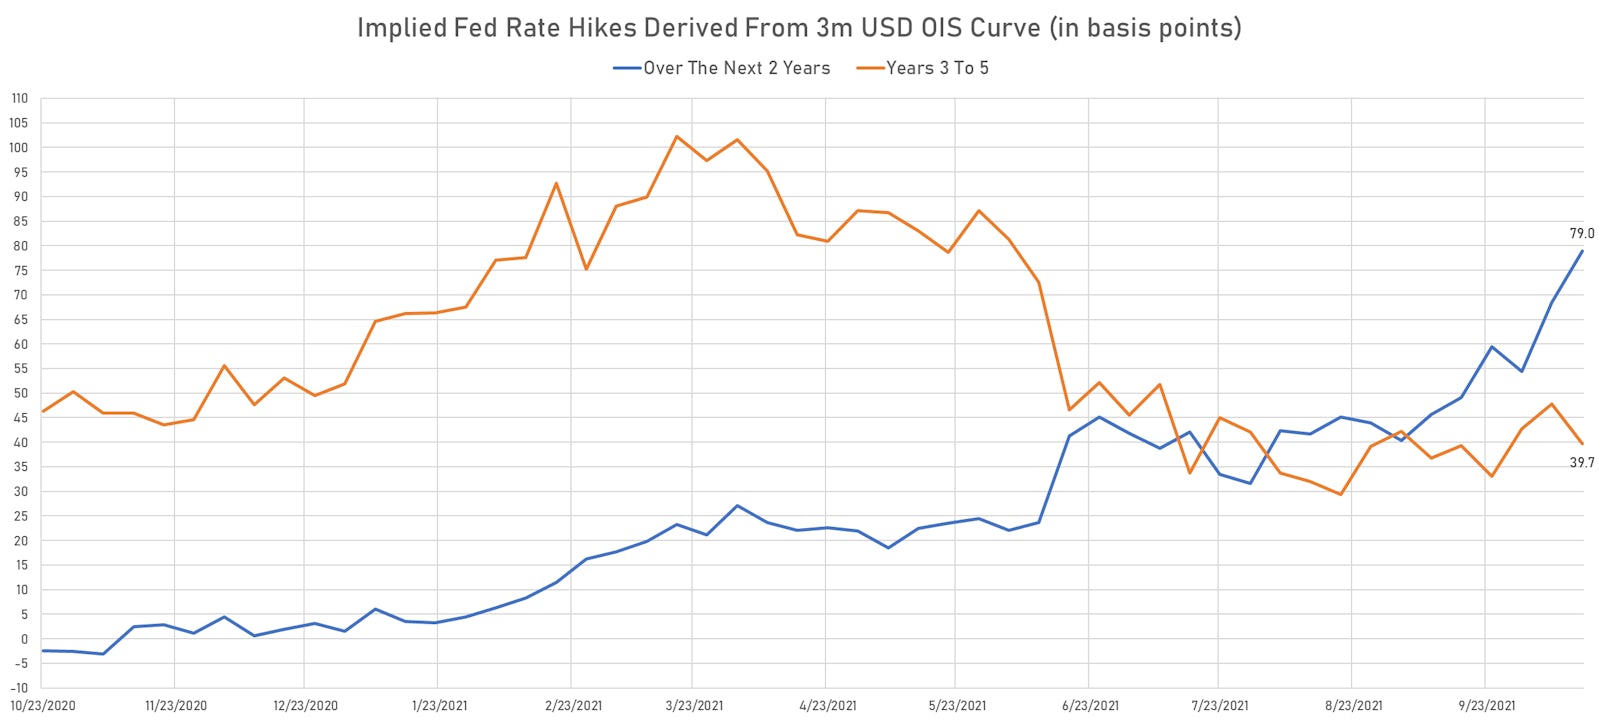 Fed rate hikes priced into the 3m USD OIS forward curve | Sources: ϕpost, Refinitiv data